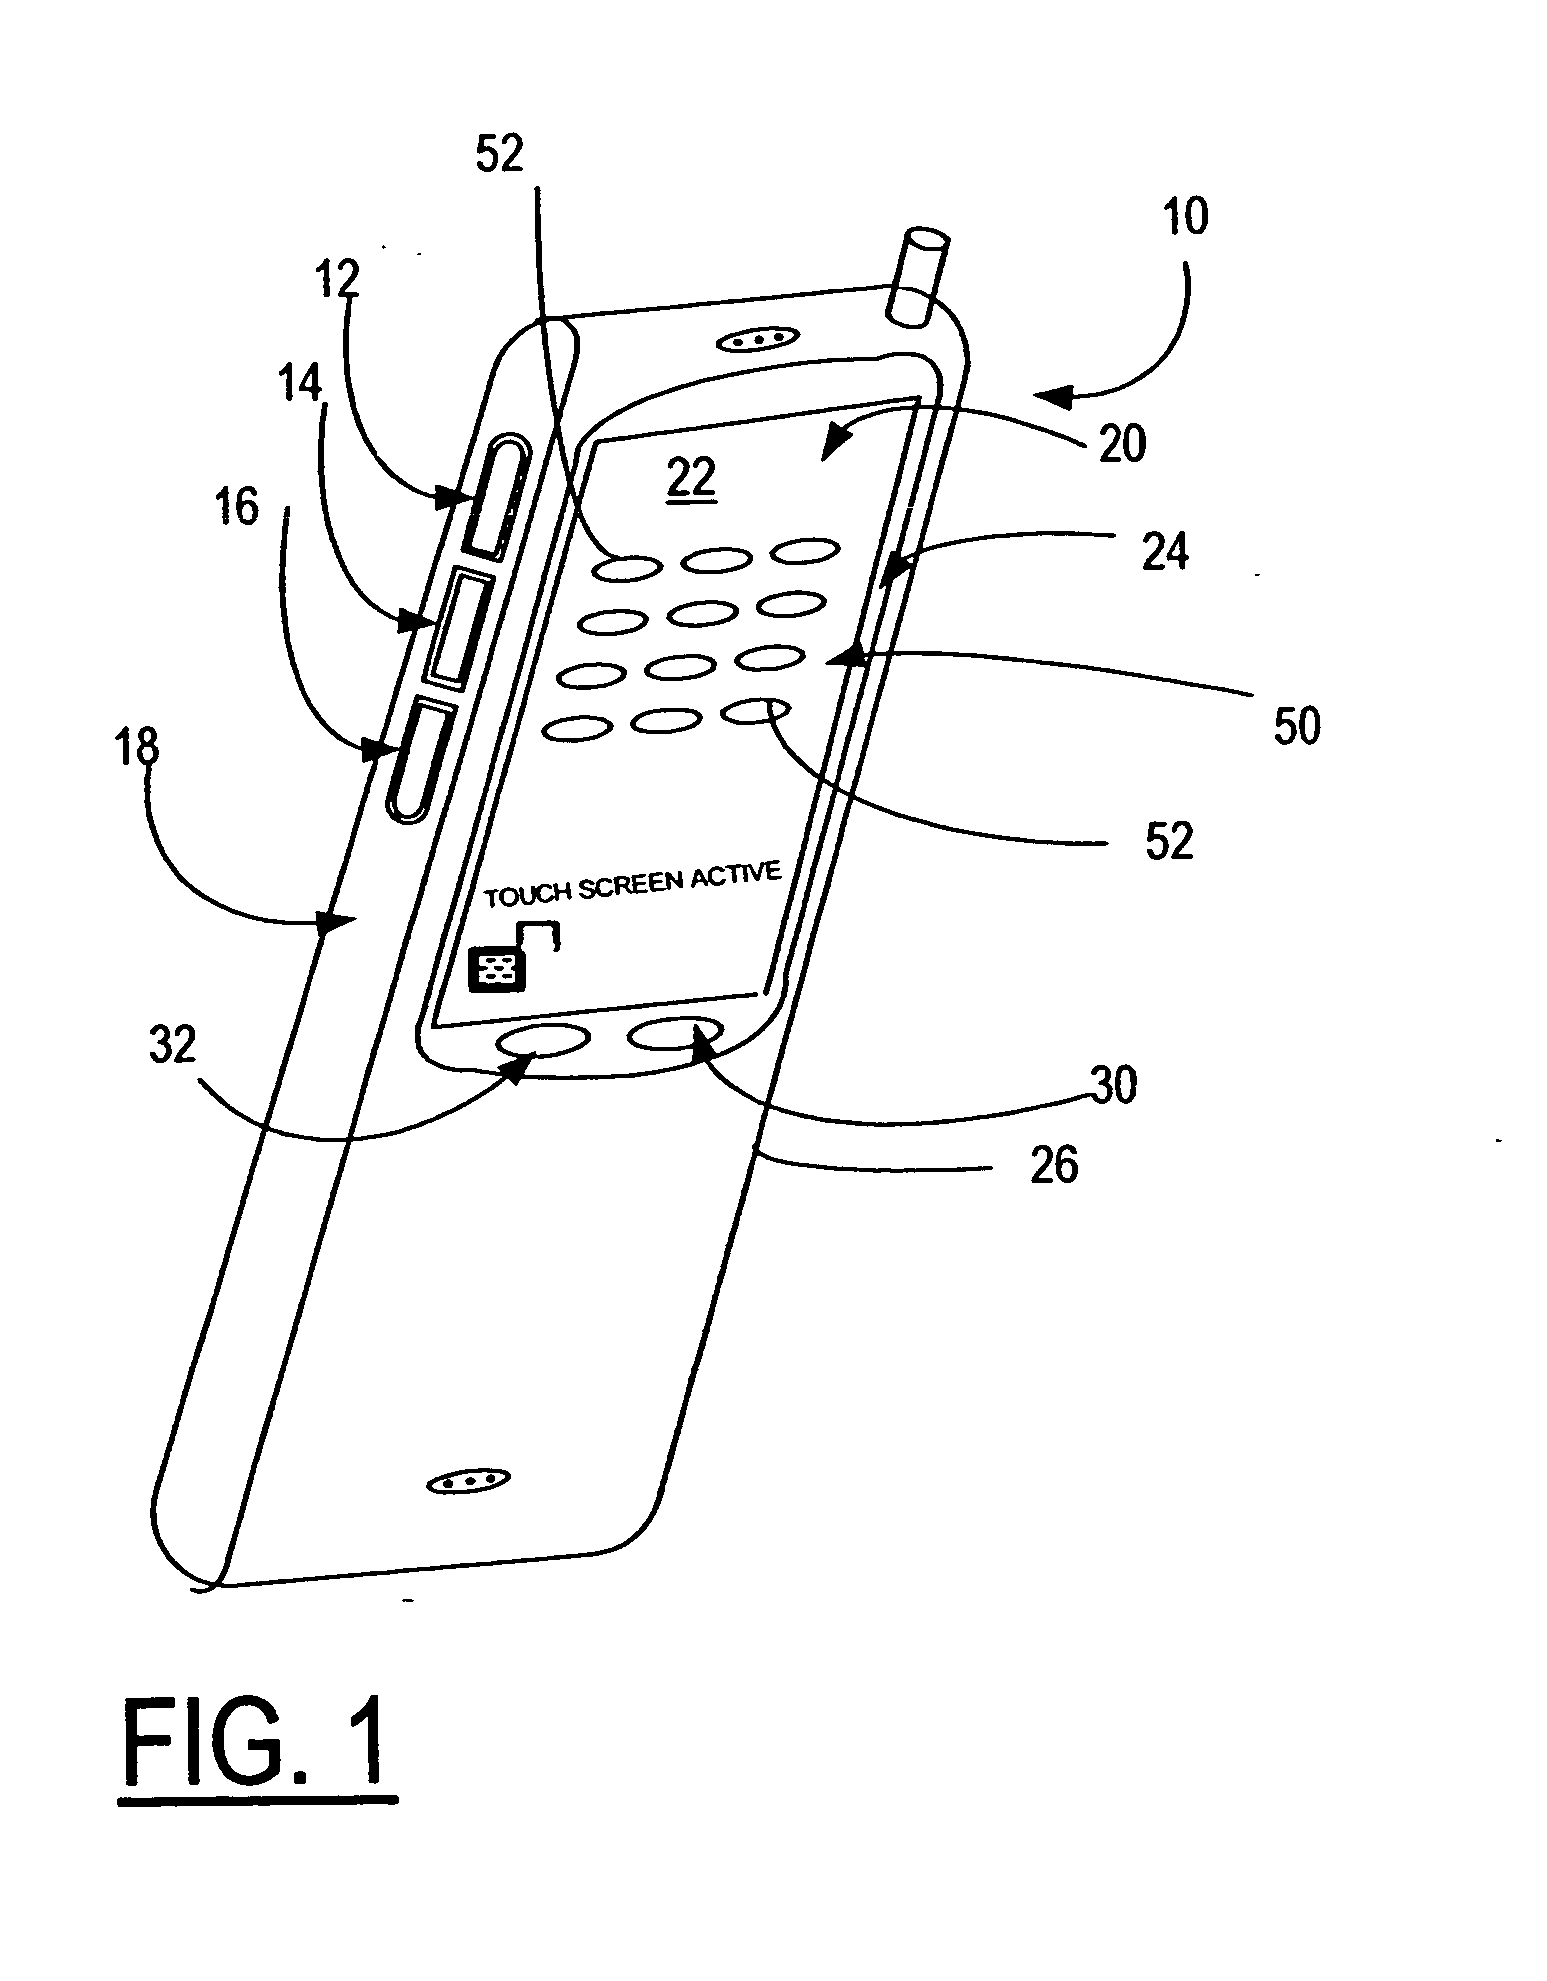 Method and related apparatus for emergency calling in a touch screen mobile phone from a touch screen and keypad lock active state